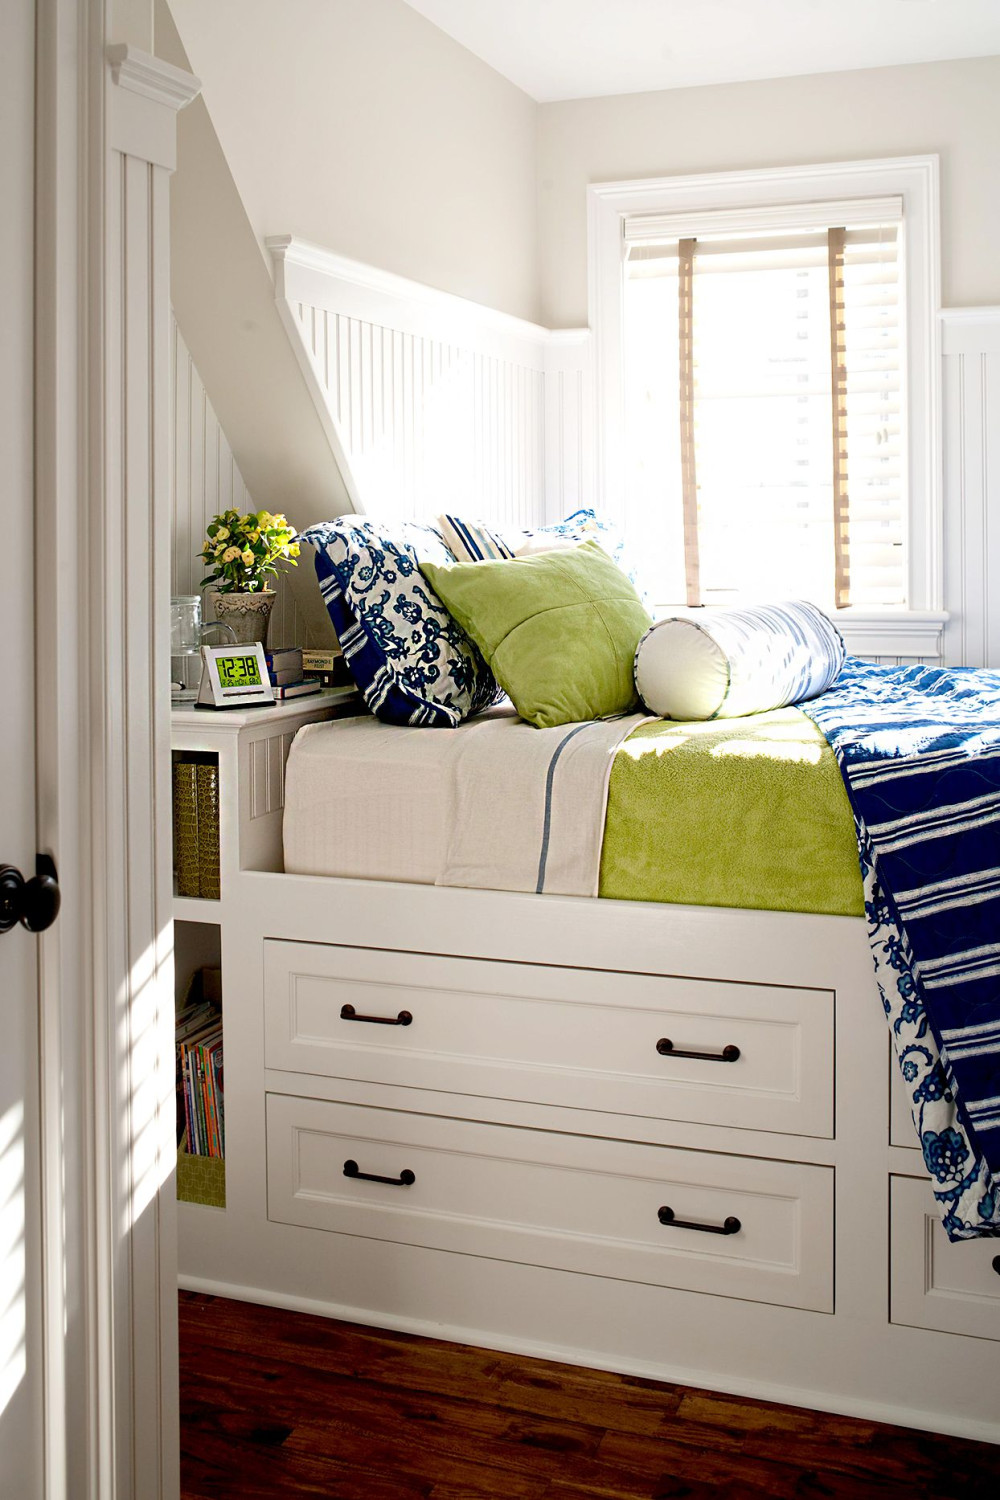 Genius Ways to Store More in Your Small Bedroom